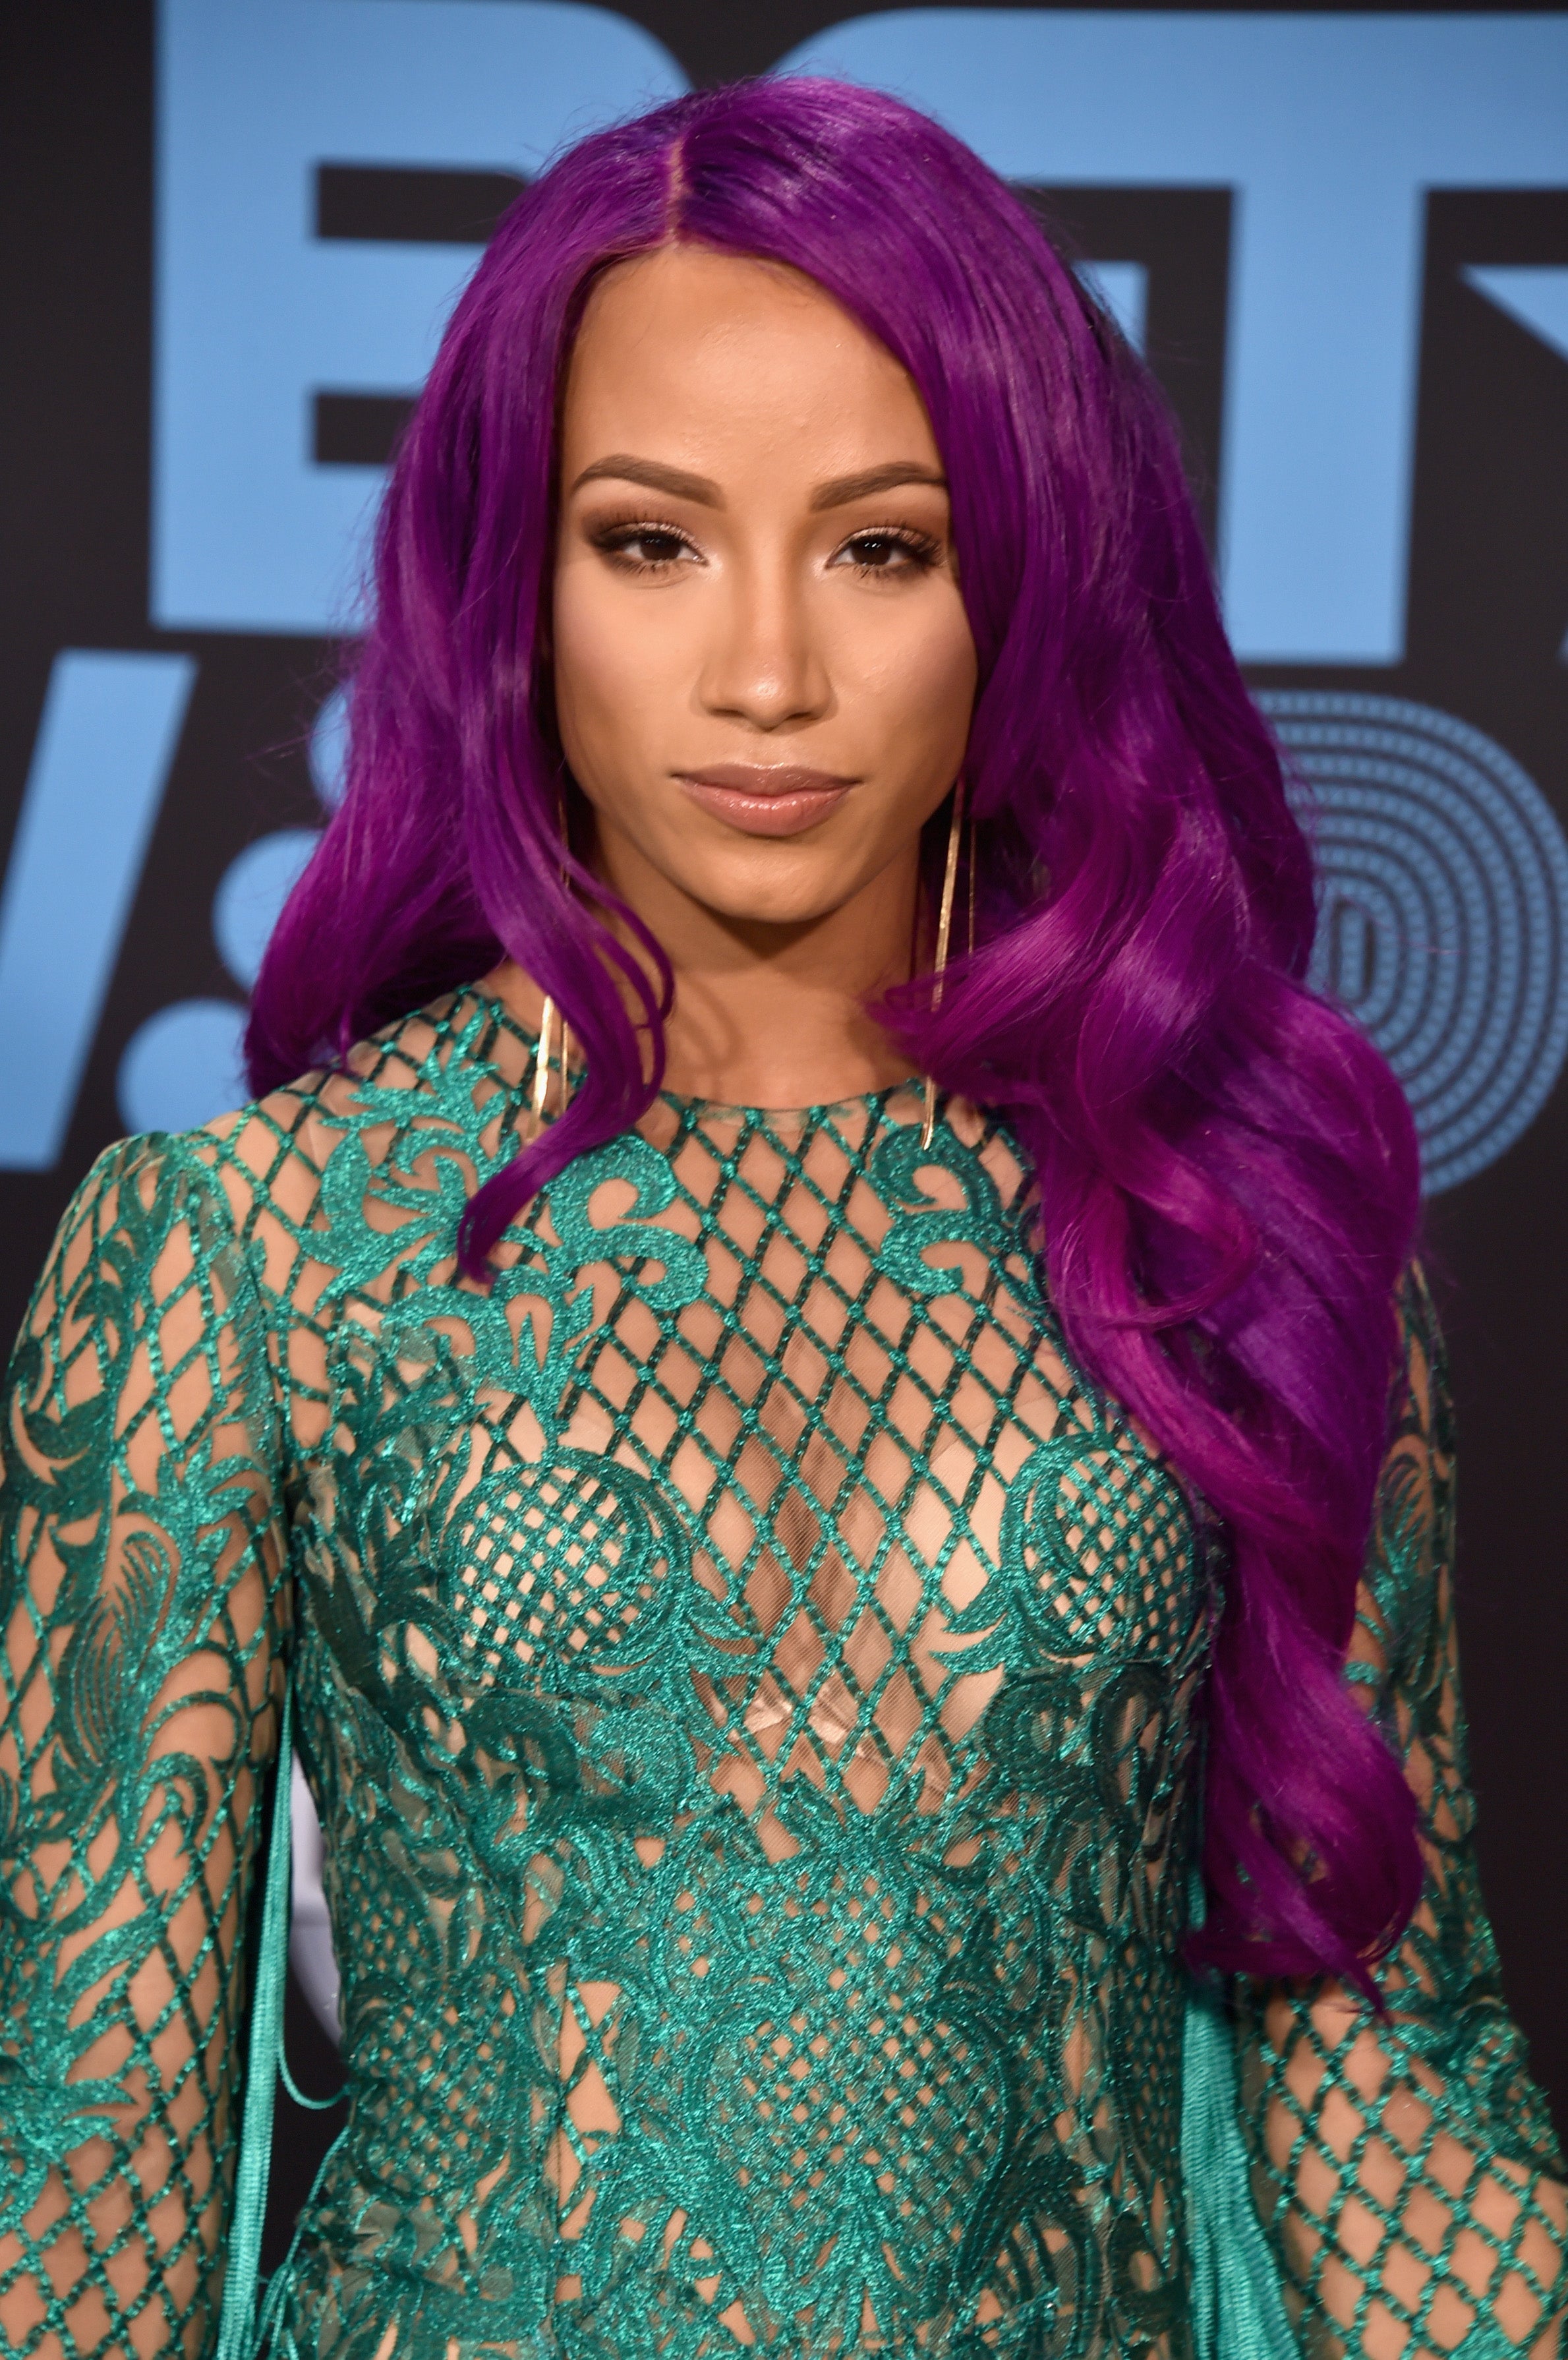 The 2017 BET Awards Hair and Makeup Moments That Caught Our Eye
